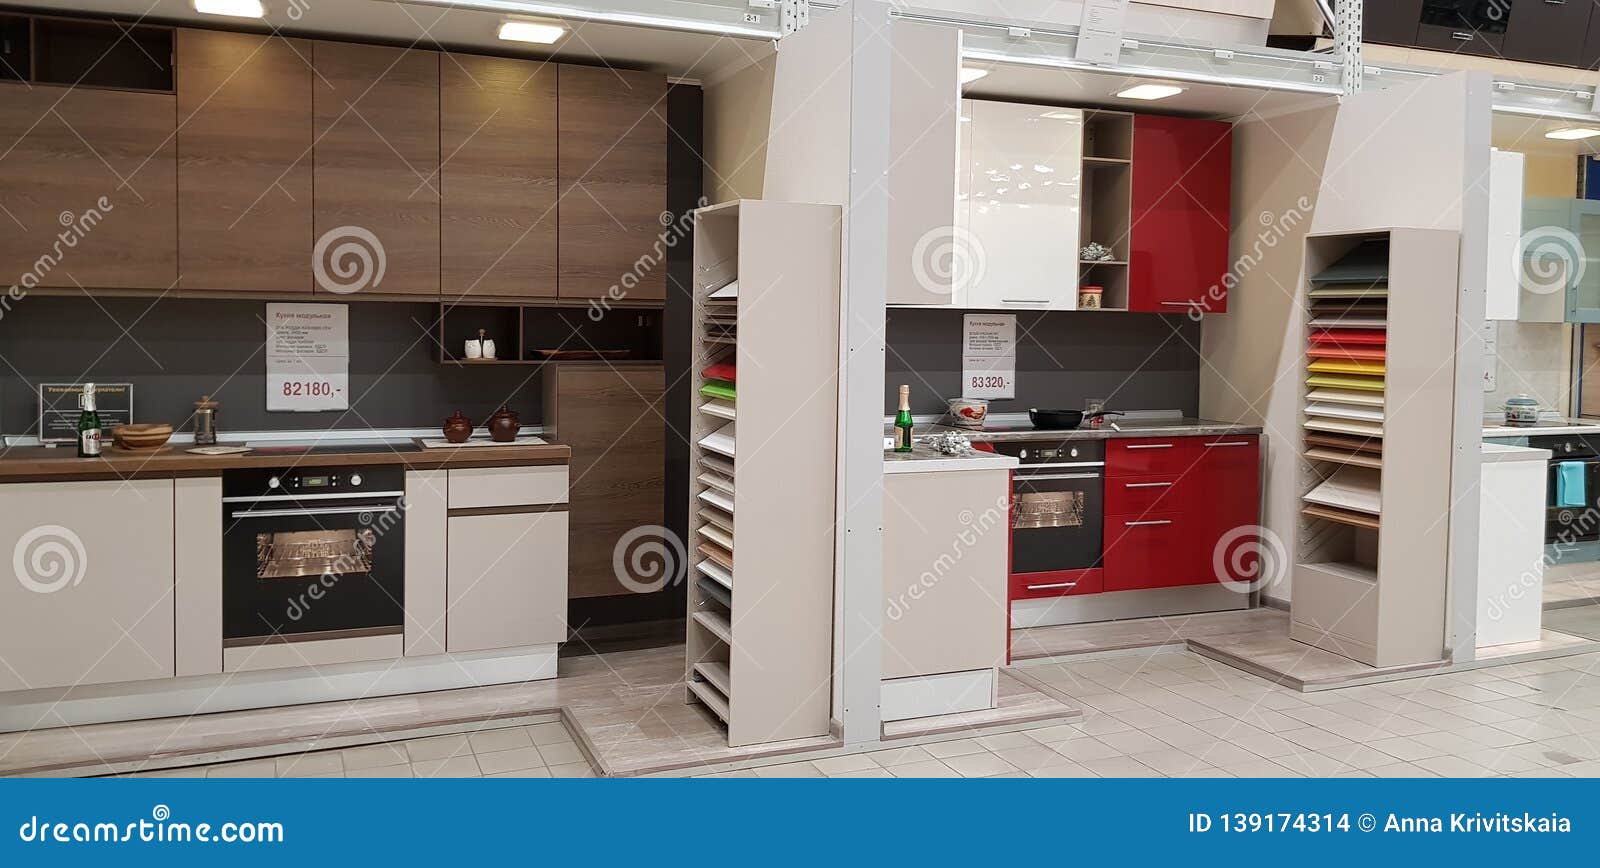 Kitchen Furniture In The Store Editorial Stock Image Image Of